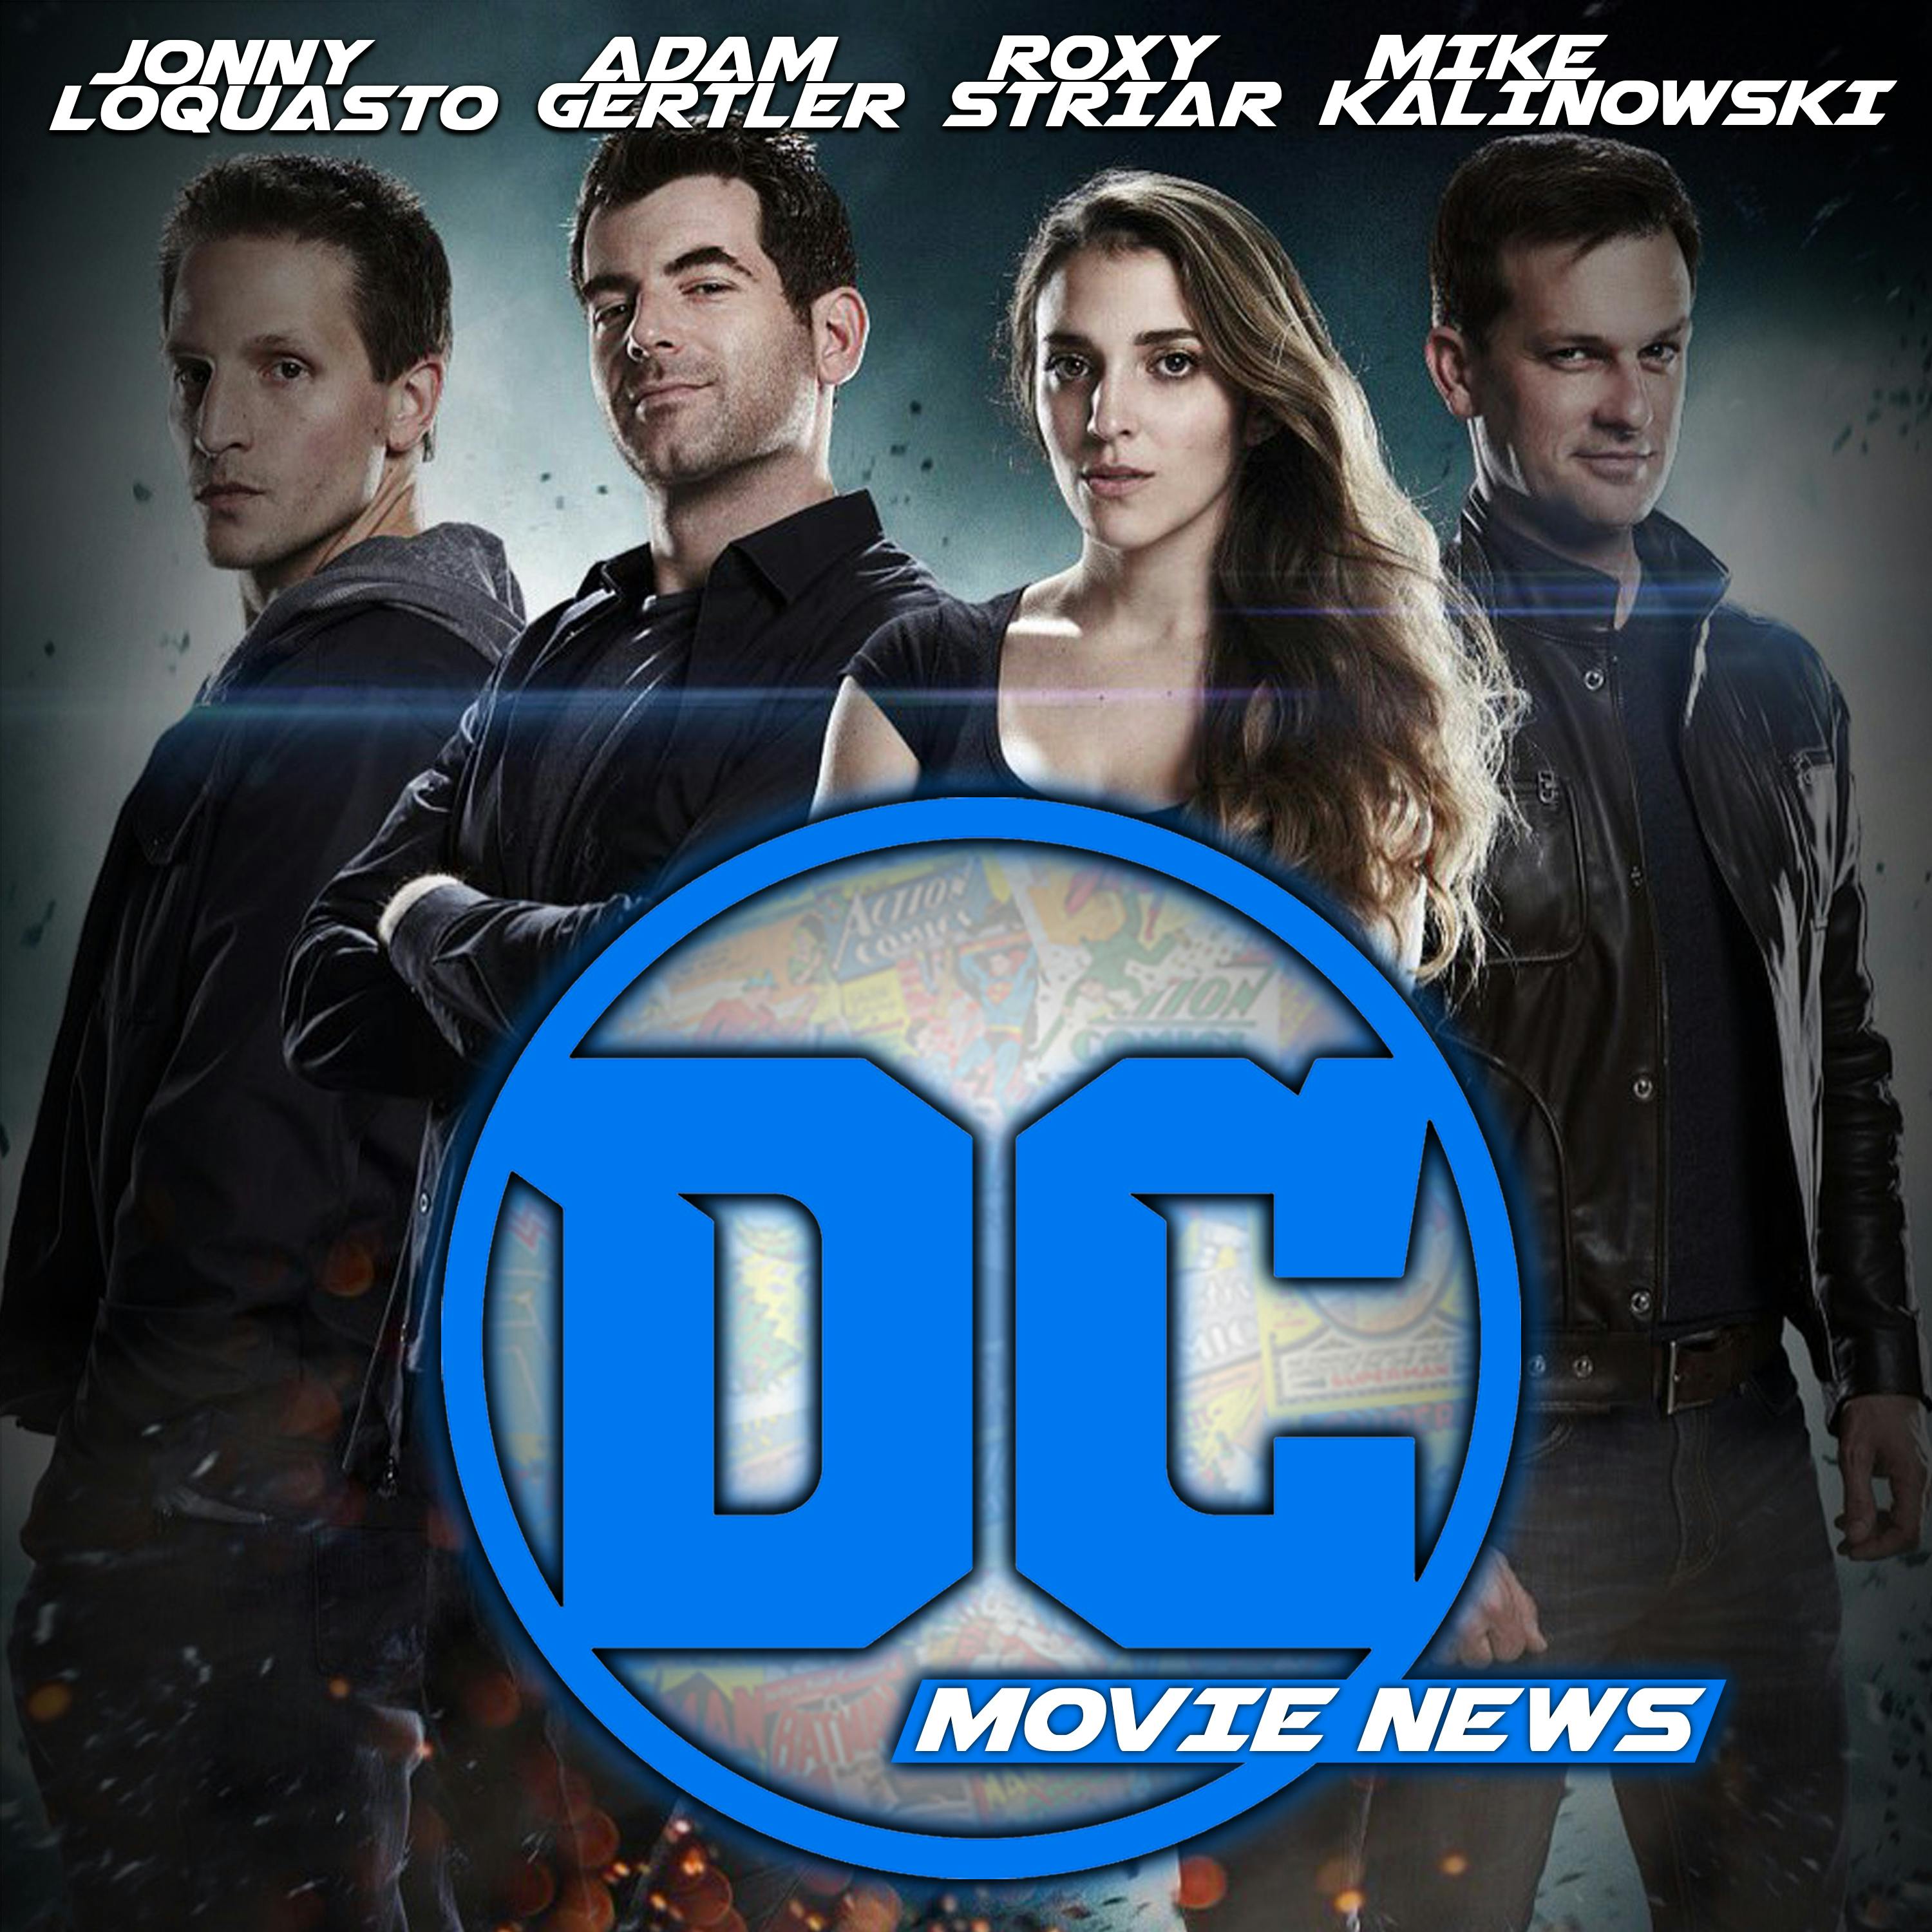 Wonder Woman Details, Killing Joke Trailer and More! – DC Movie News for April 28th, 2016